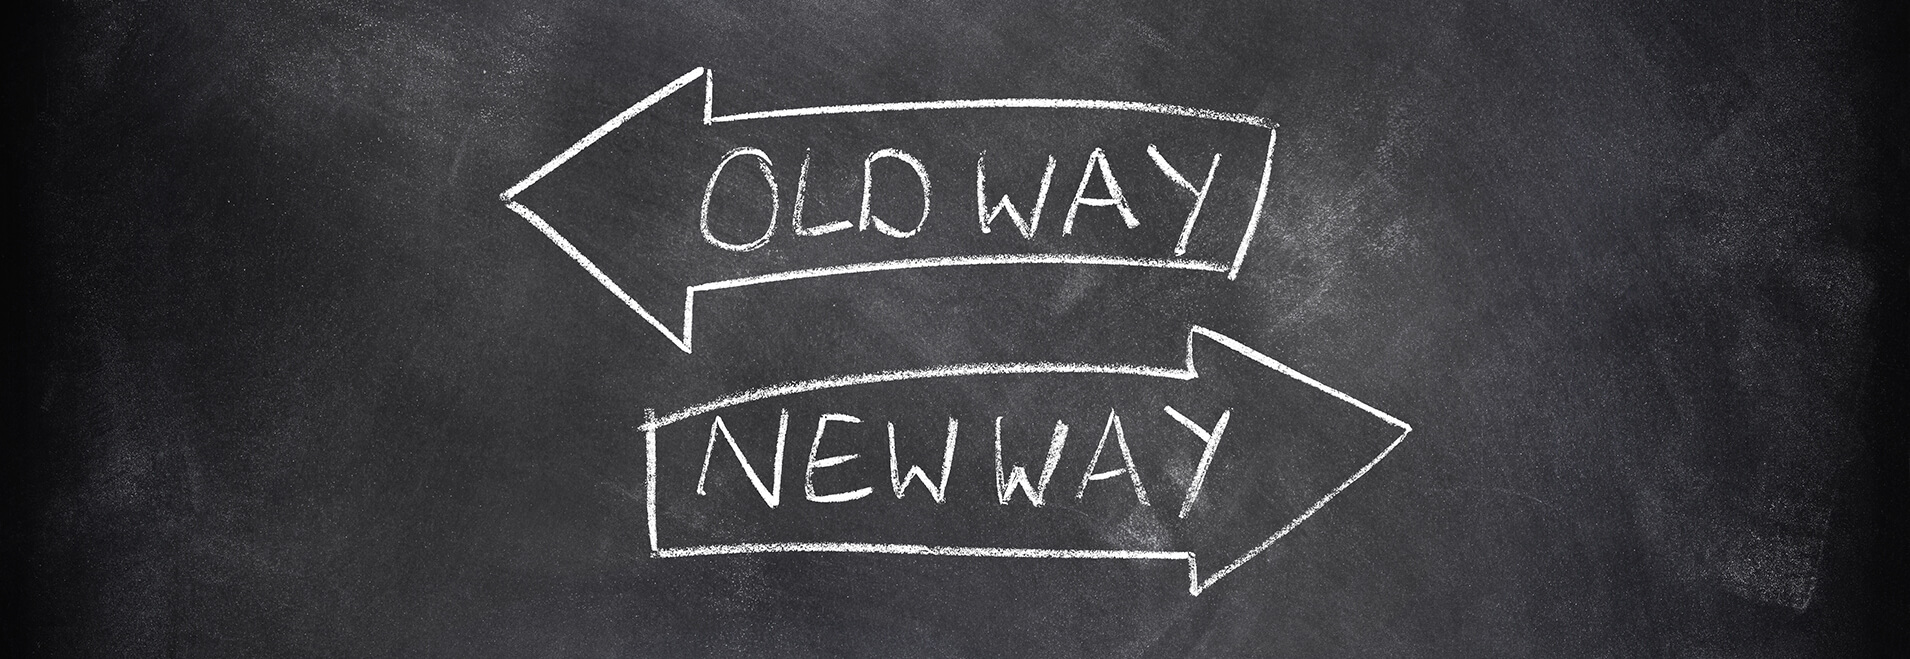 Generate Insights - Strategic Creativity - blackboard with arrows labelled 'old way' & 'new way' pointing in opposite directions